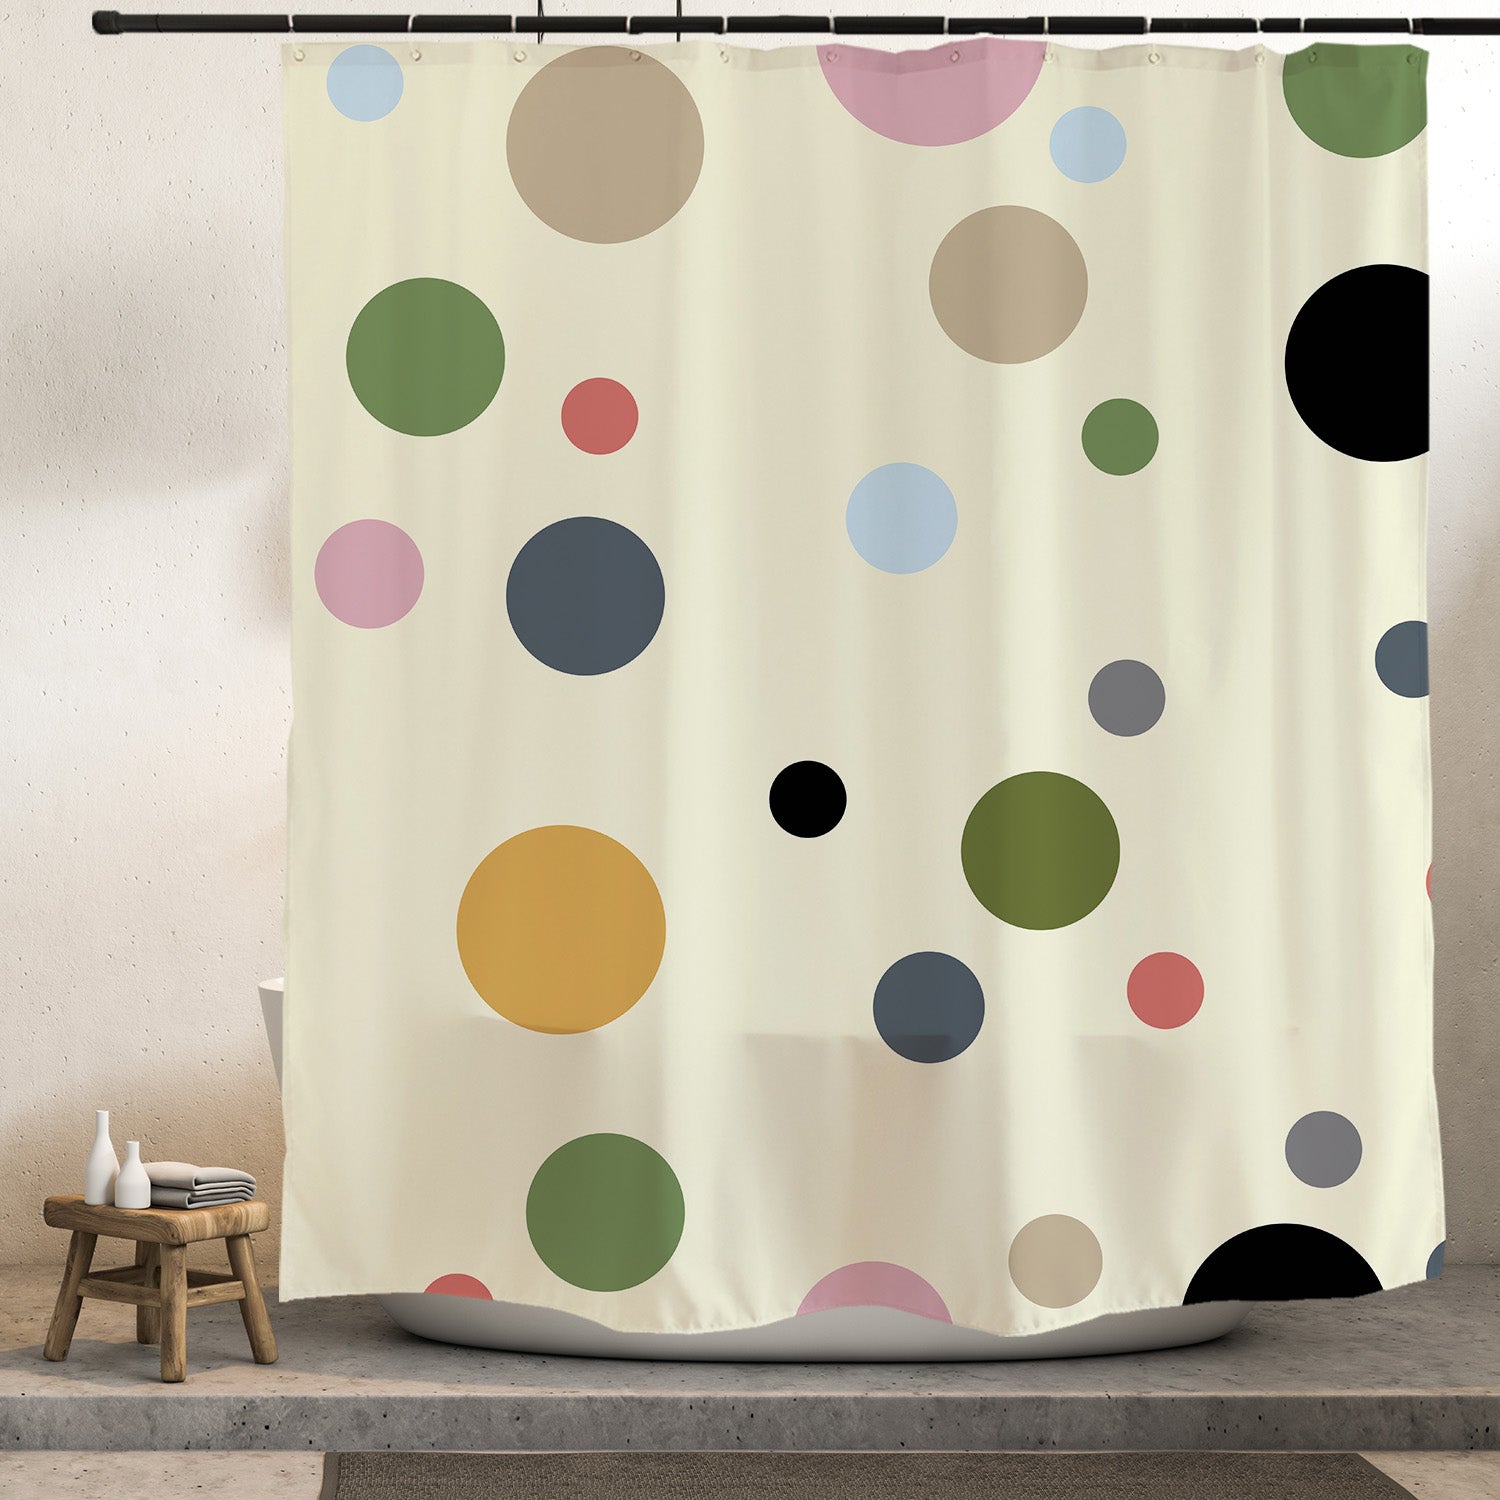 Feblilac Colorful Polka Dots Shower Curtain with Hooks